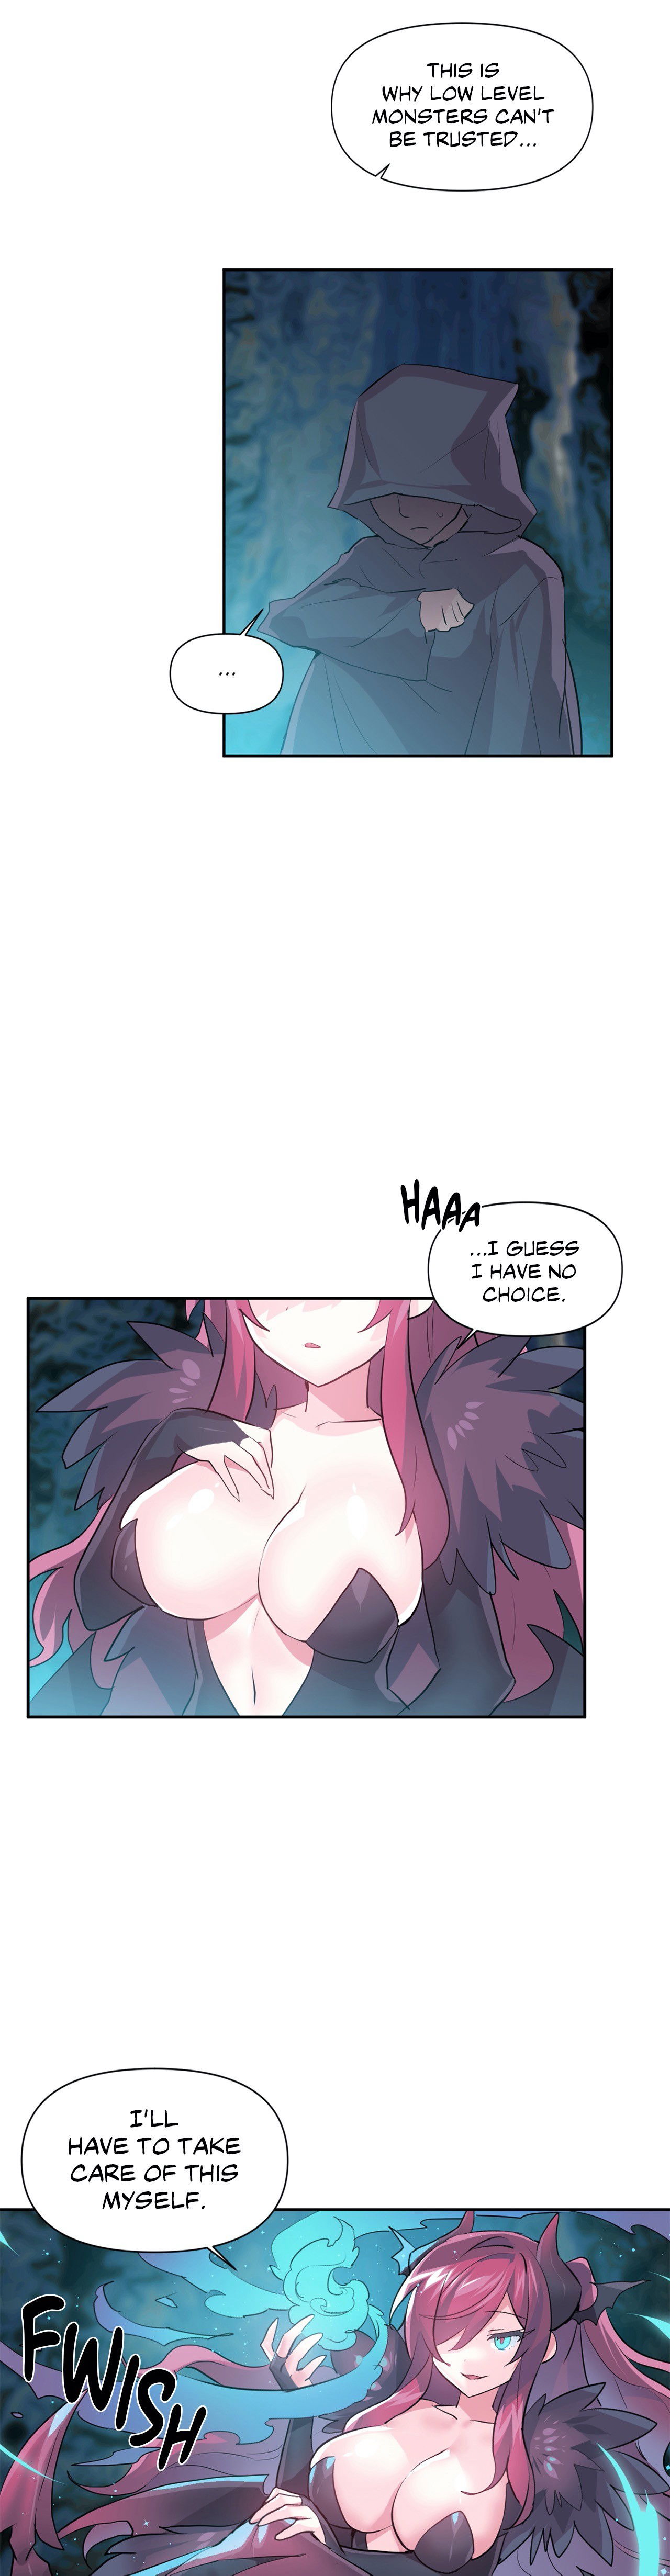 log-in-to-lust-a-land-chap-33-2